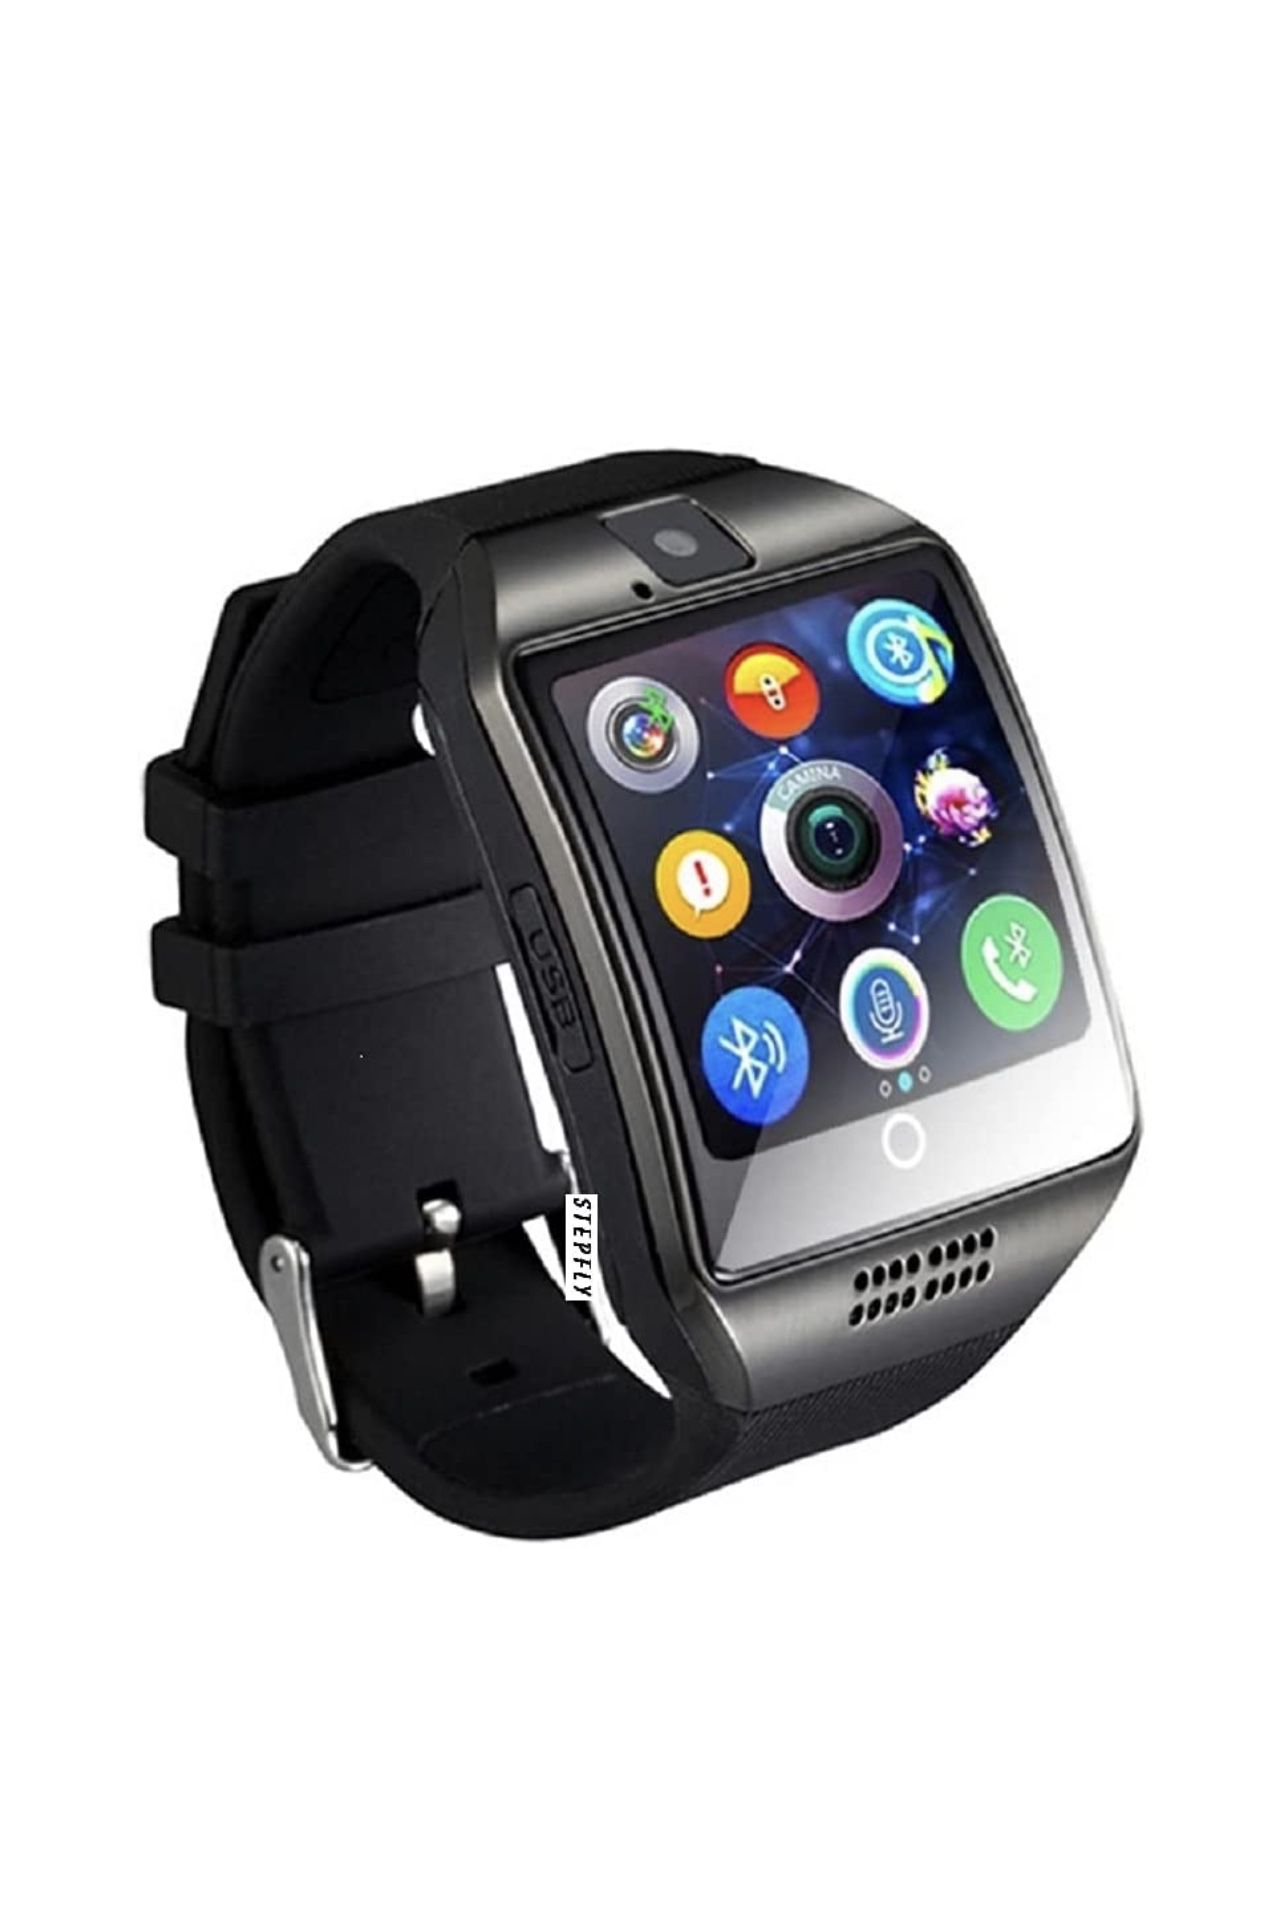 Stepfly Bluetooth Smart Watch with Camera Sim Card Slot Message Notifications Android Smartwatch for Android Mobile Phone